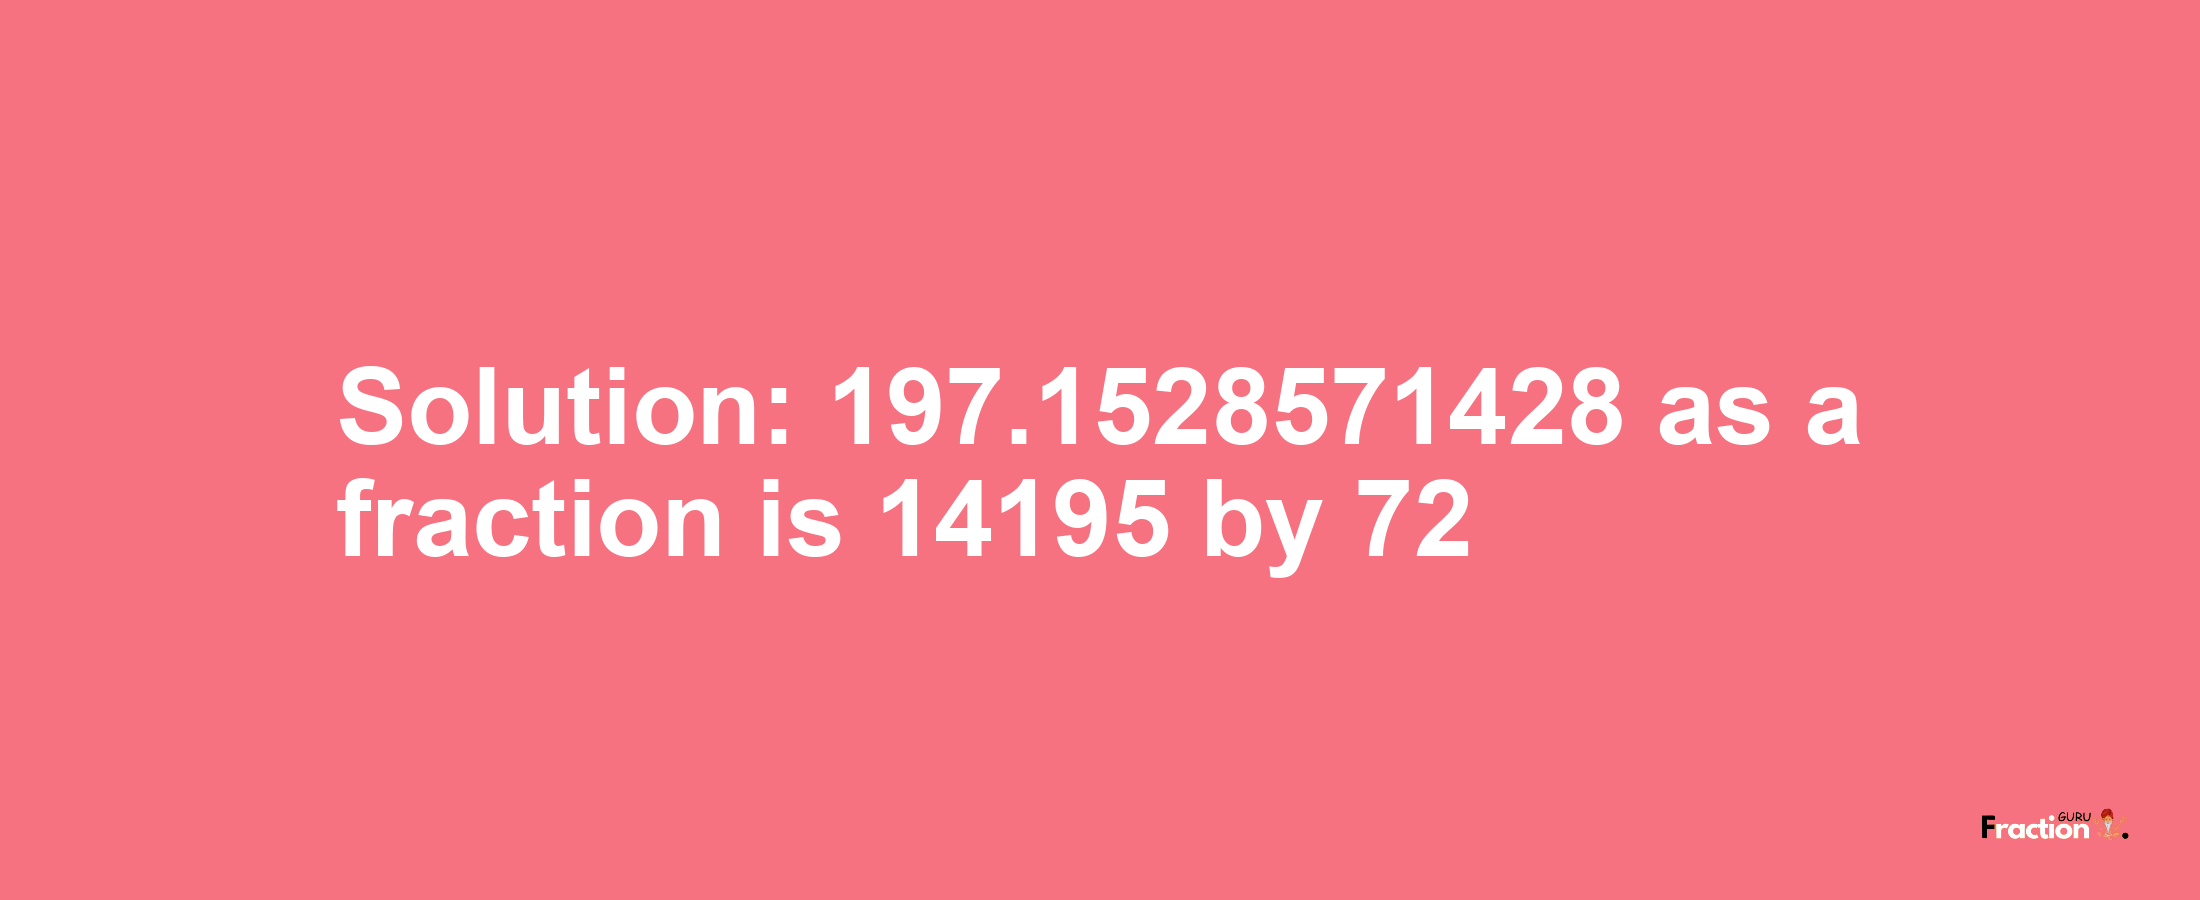 Solution:197.1528571428 as a fraction is 14195/72